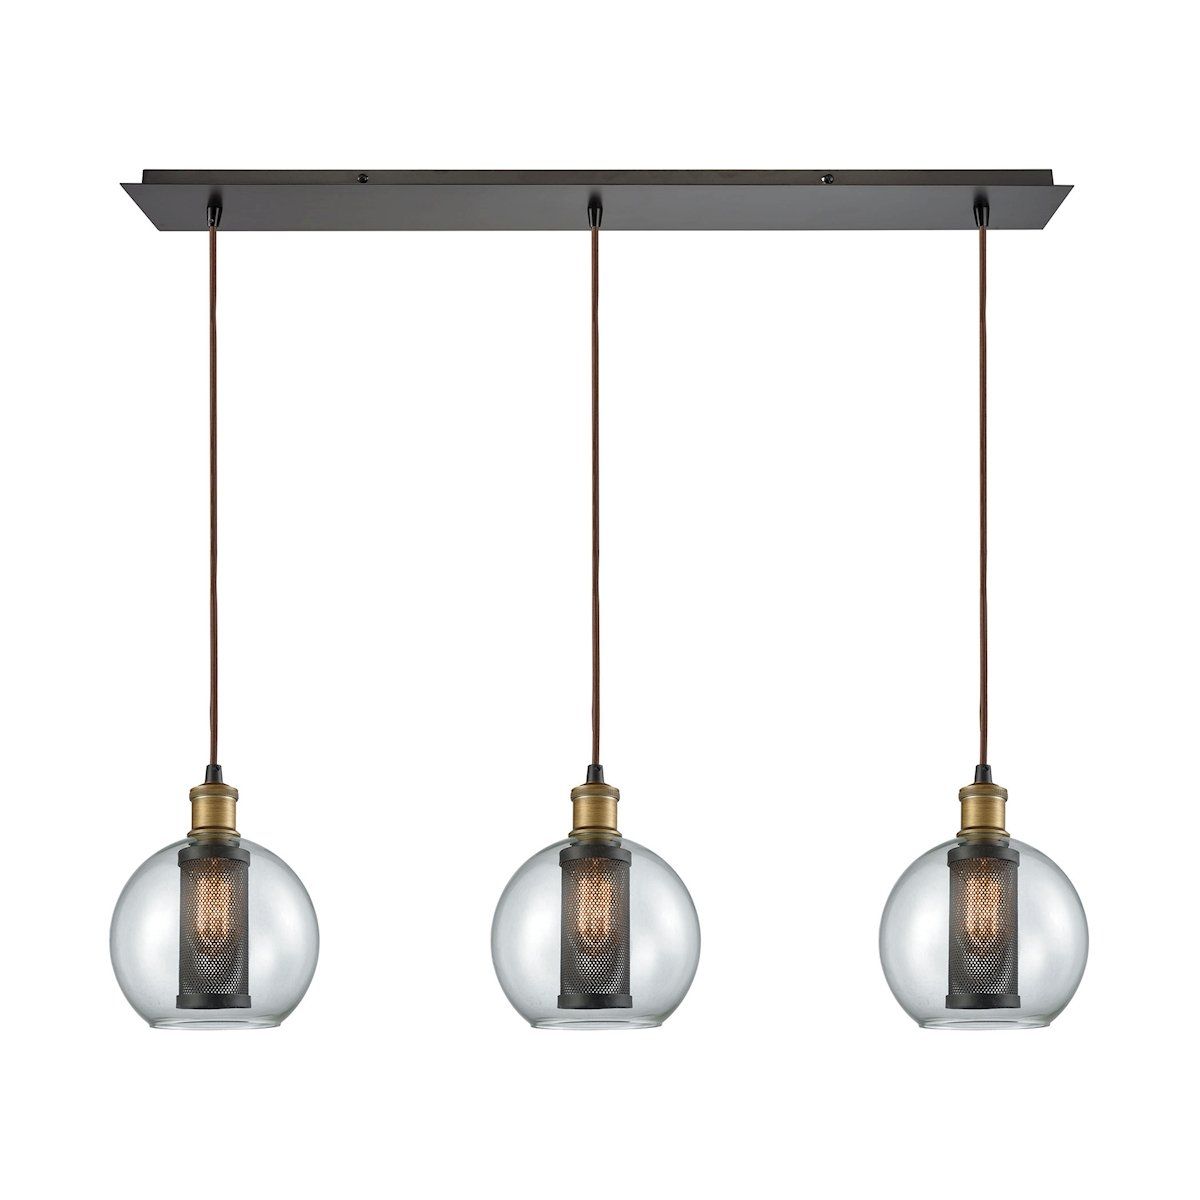 Bremington 3 Light Linear Pan Pendant In Tarnished Brass/Oil Rubbed Bronze With Clear Glass And Perforated Metal Cage Ceiling Elk Lighting 